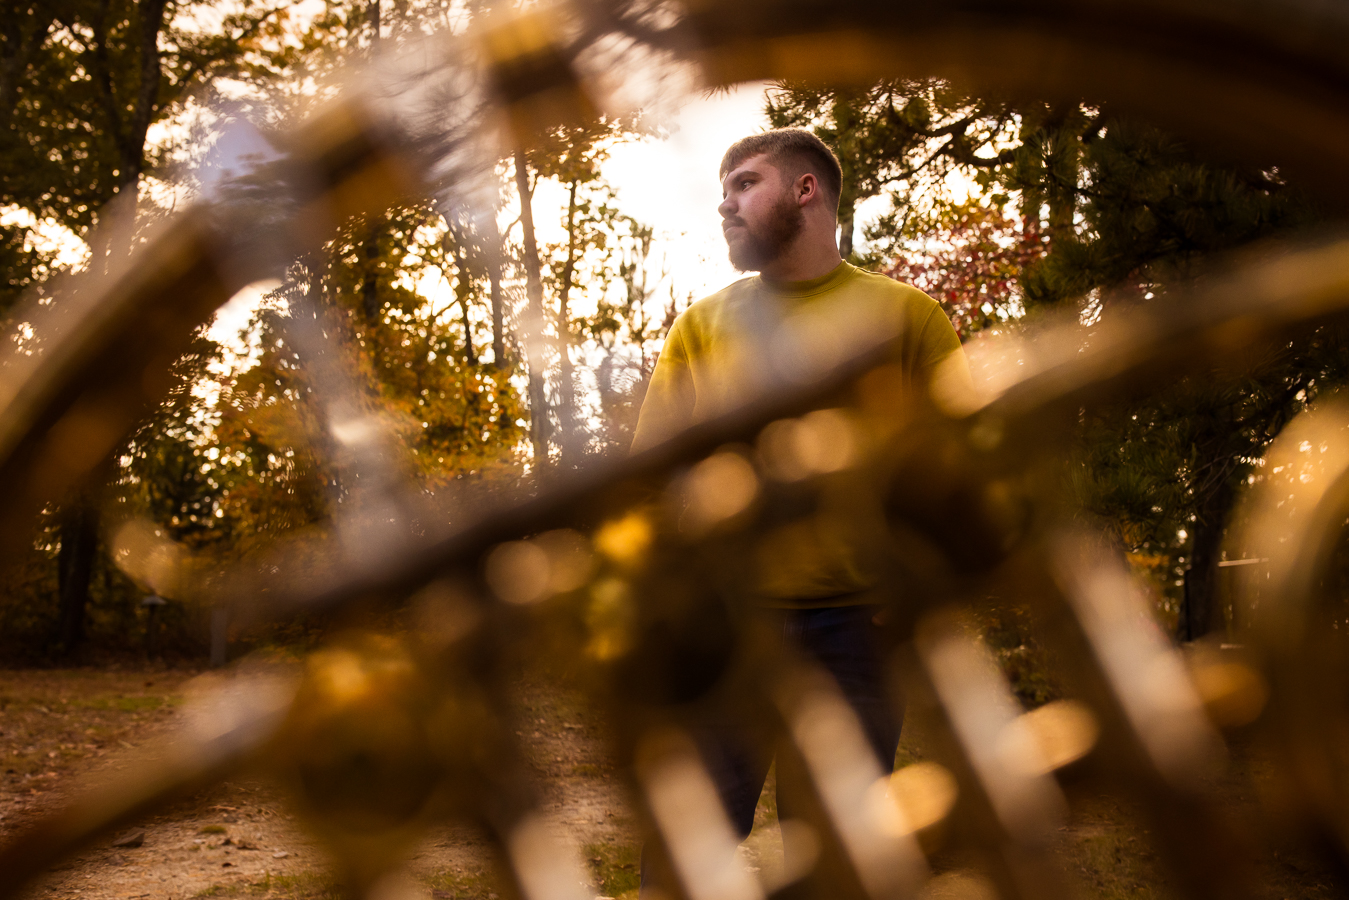 northern york senior portrait photographer, lisa rhinehart, captures this creative, unique image of this senior with cerebral palsy through his french horn as he is surrounded by the fall foliage of kings gap mansion in central pa 